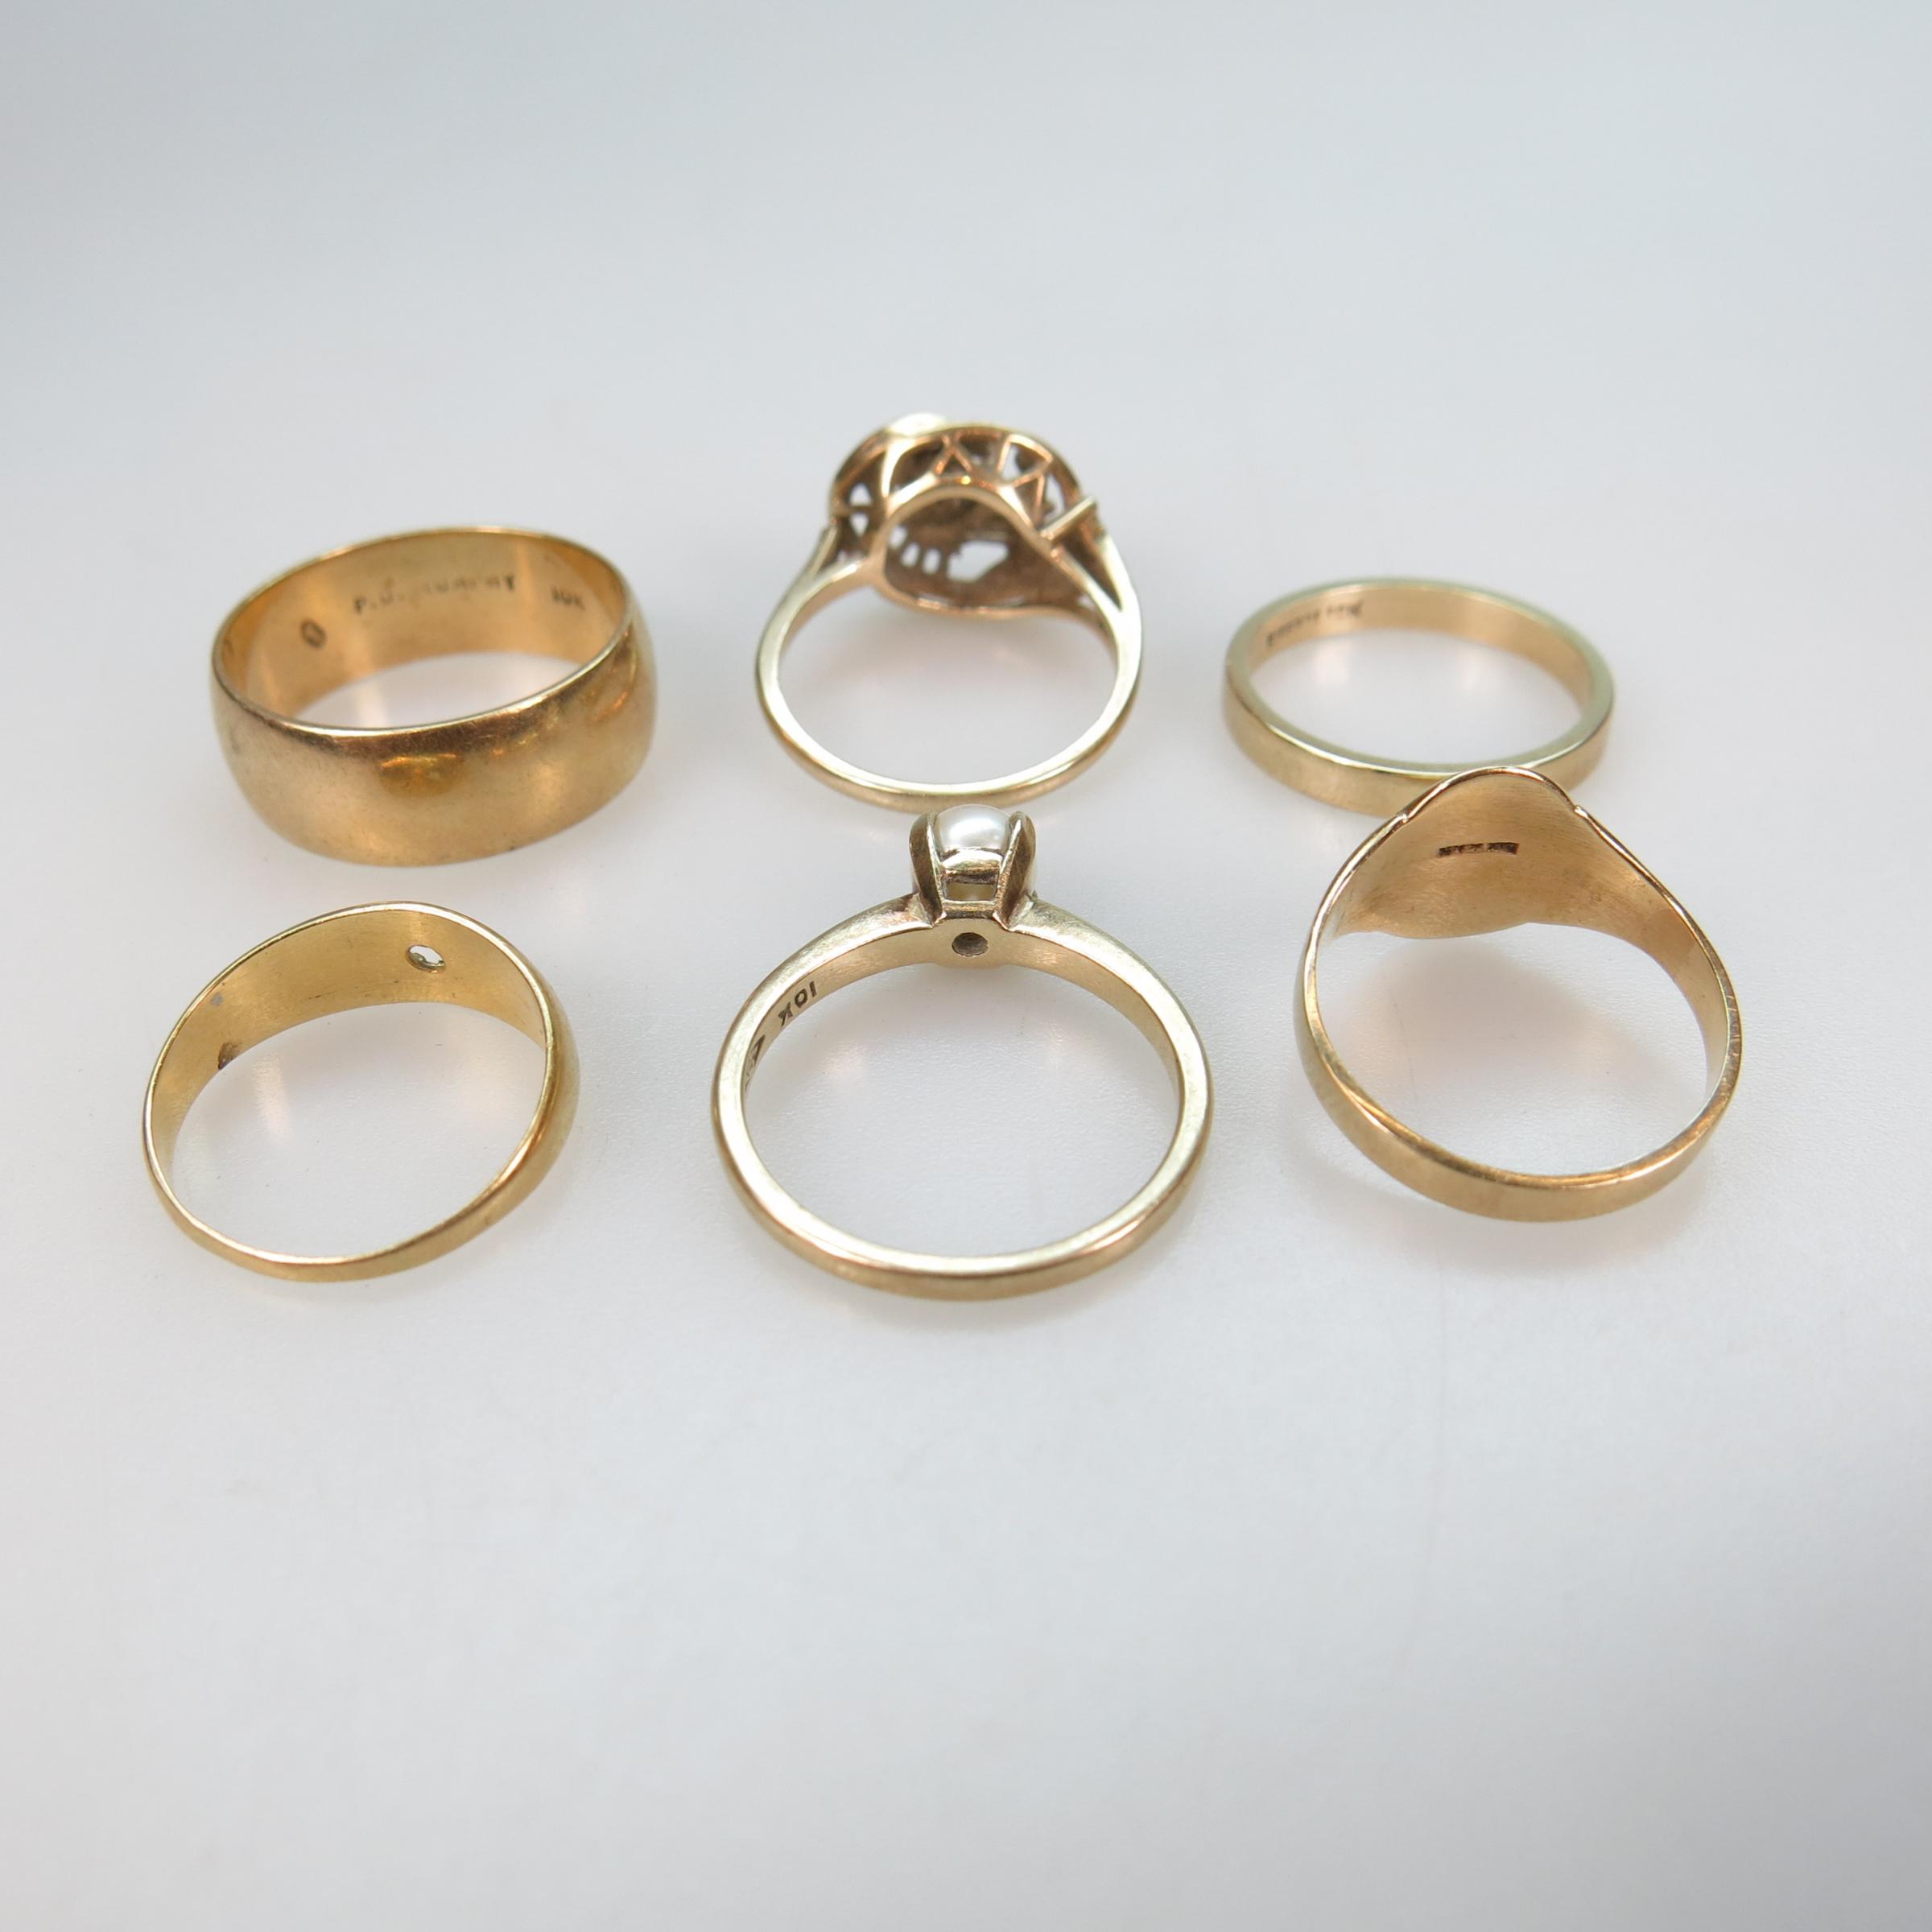 6 x 10k Yellow Gold Rings And Bands